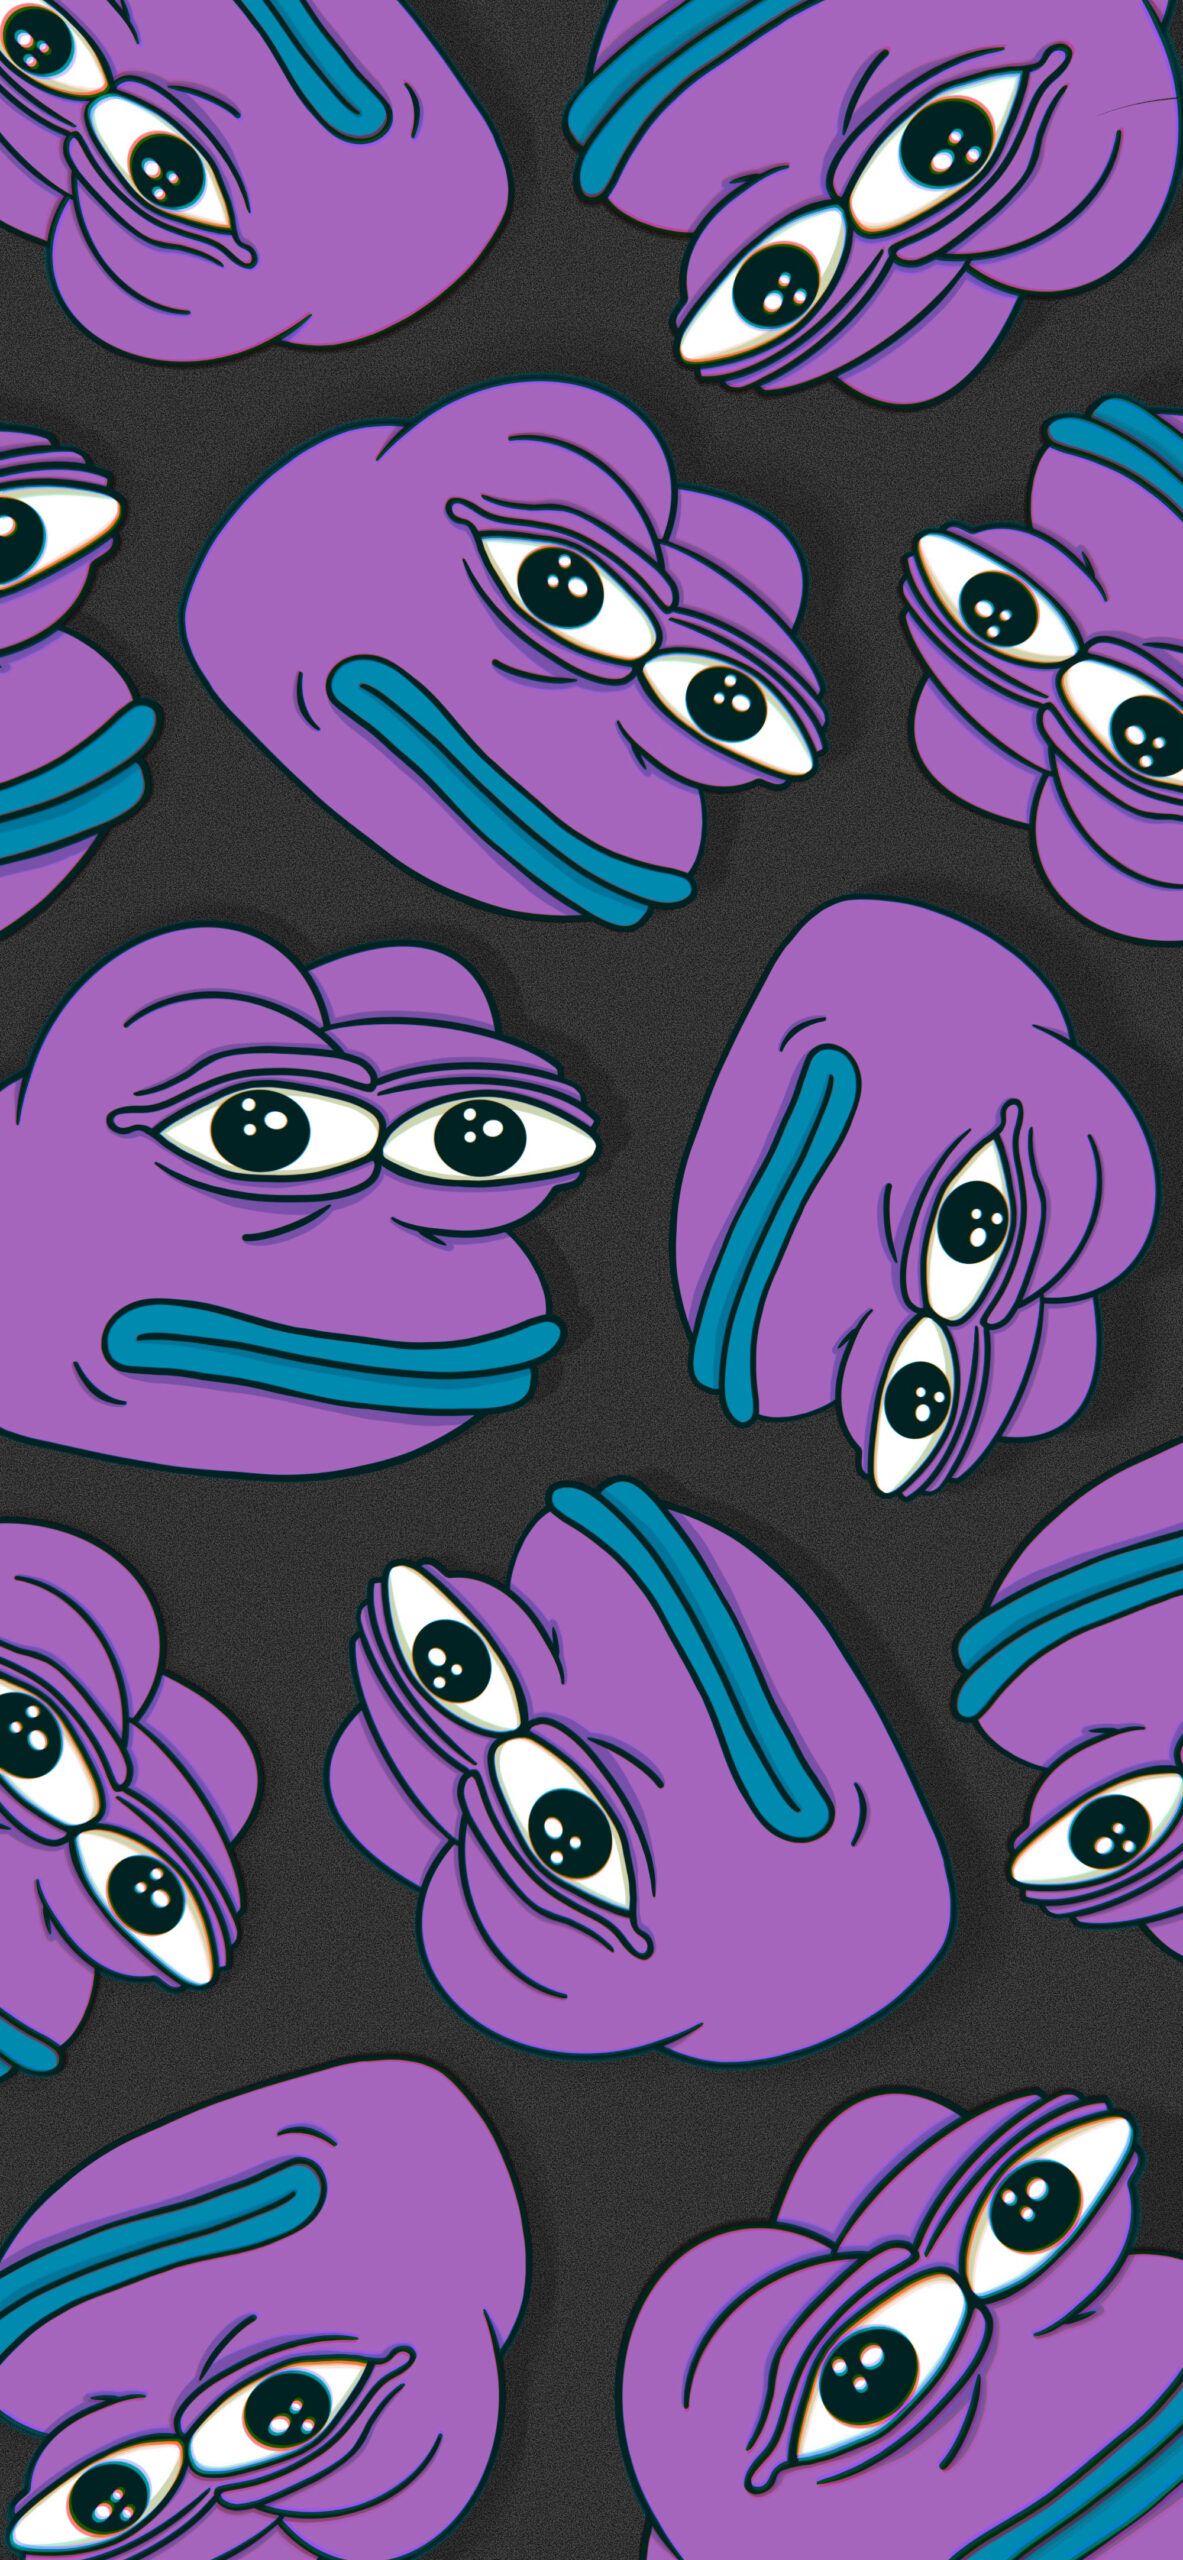 Pepe the Frog Wallpaper for Phone Meme Wallpaper with Pepe